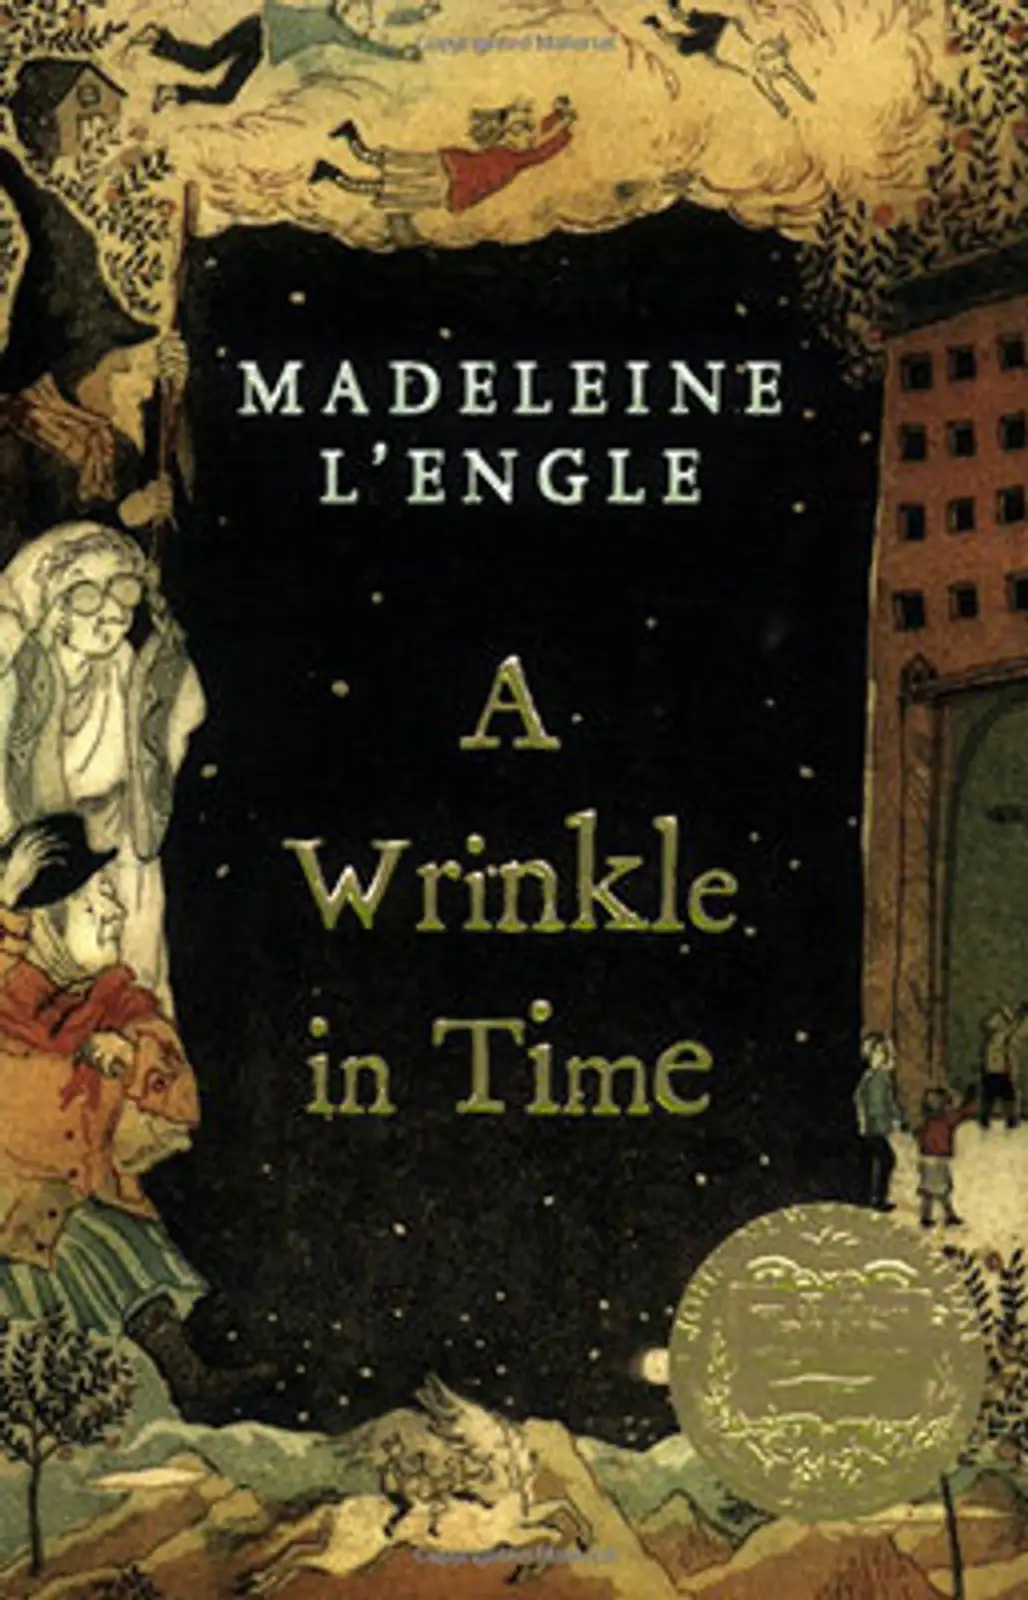 Wrinkle in Time Series by Madeleine L’Engle